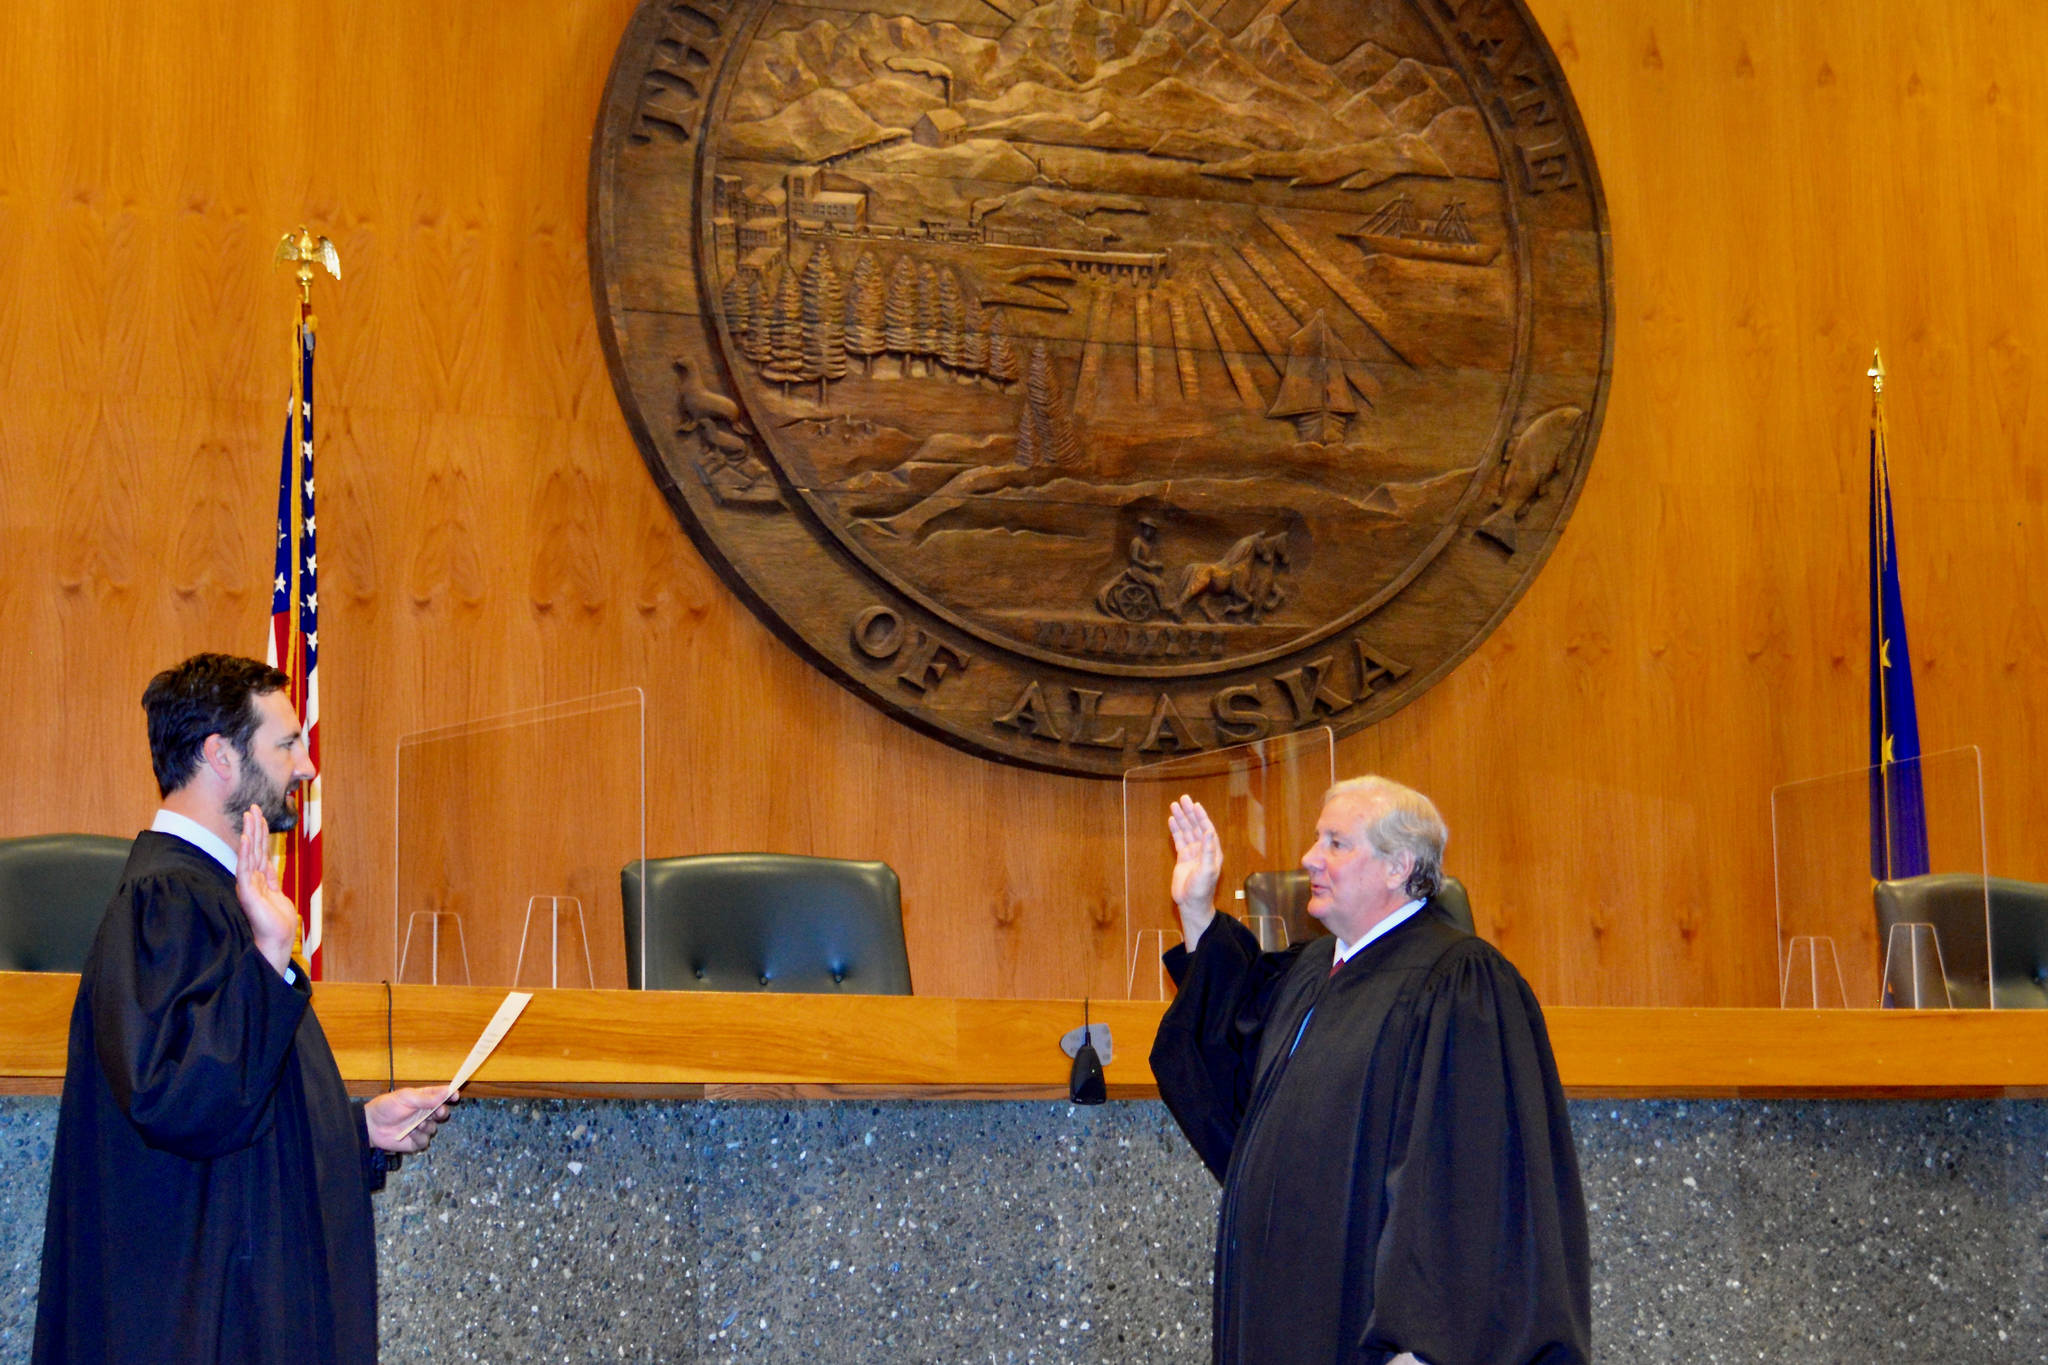 Courtesy photo / Alaska Court System
Chief Justice Daniel E. Winfree, right, is sword in by Justice Dario Borghesan in Anchorage on July 1. Winfree will take over after former Chief Justice Joel Bolger retired earlier this year.